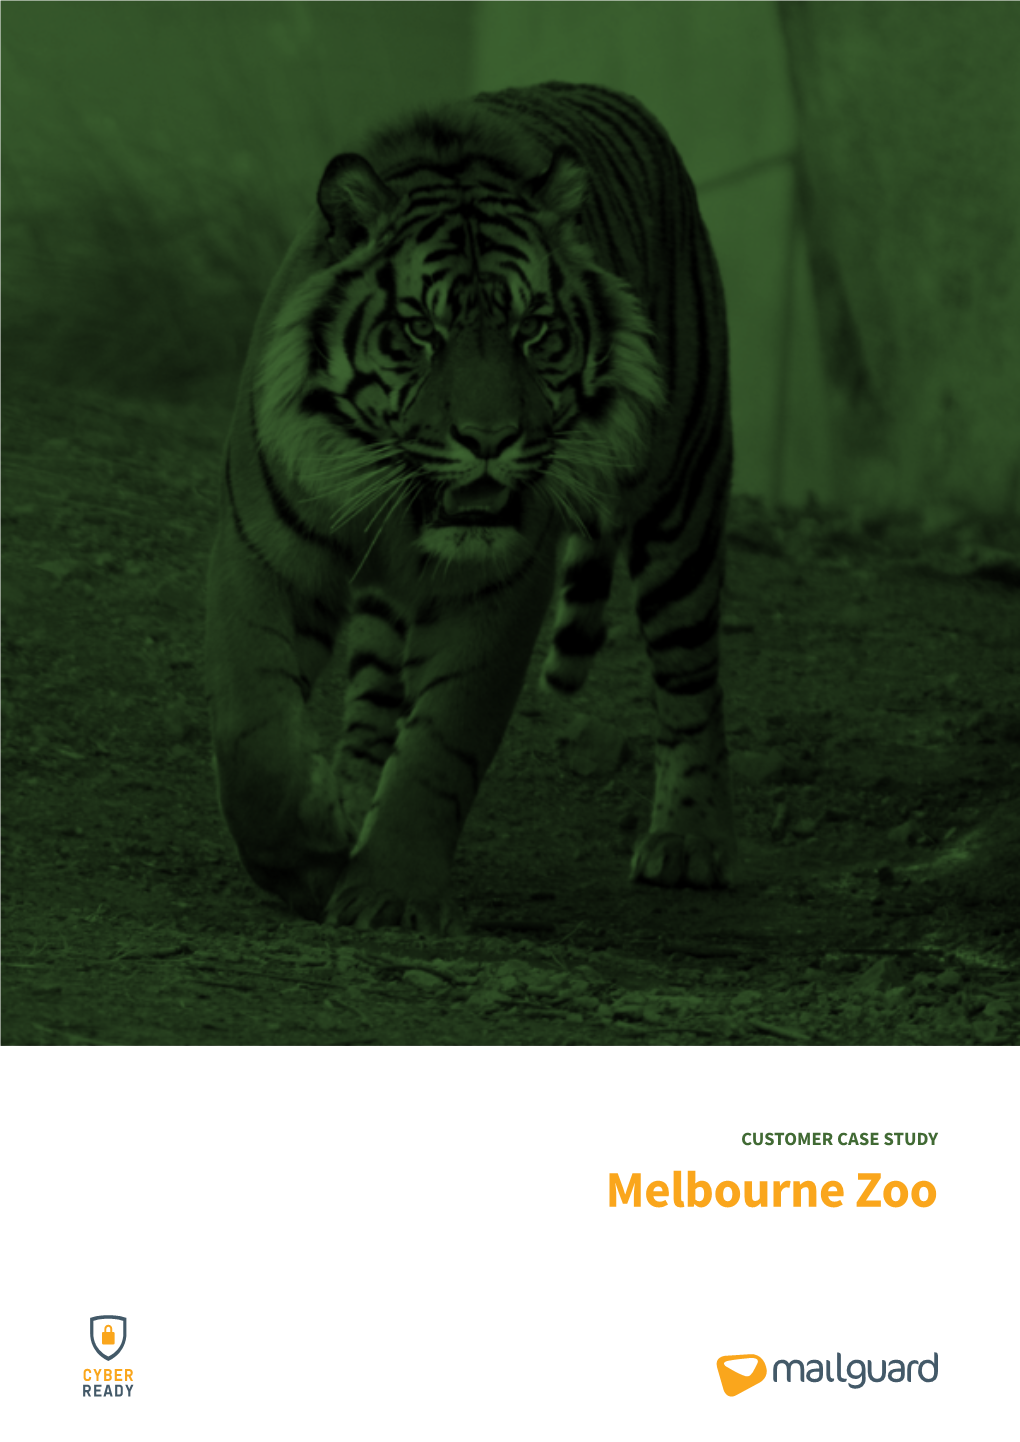 Melbourne Zoo Melbourne Zoo Is Australia’S Oldest Zoo and Is Believed to Be the Eleventh Oldest Zoo in the World